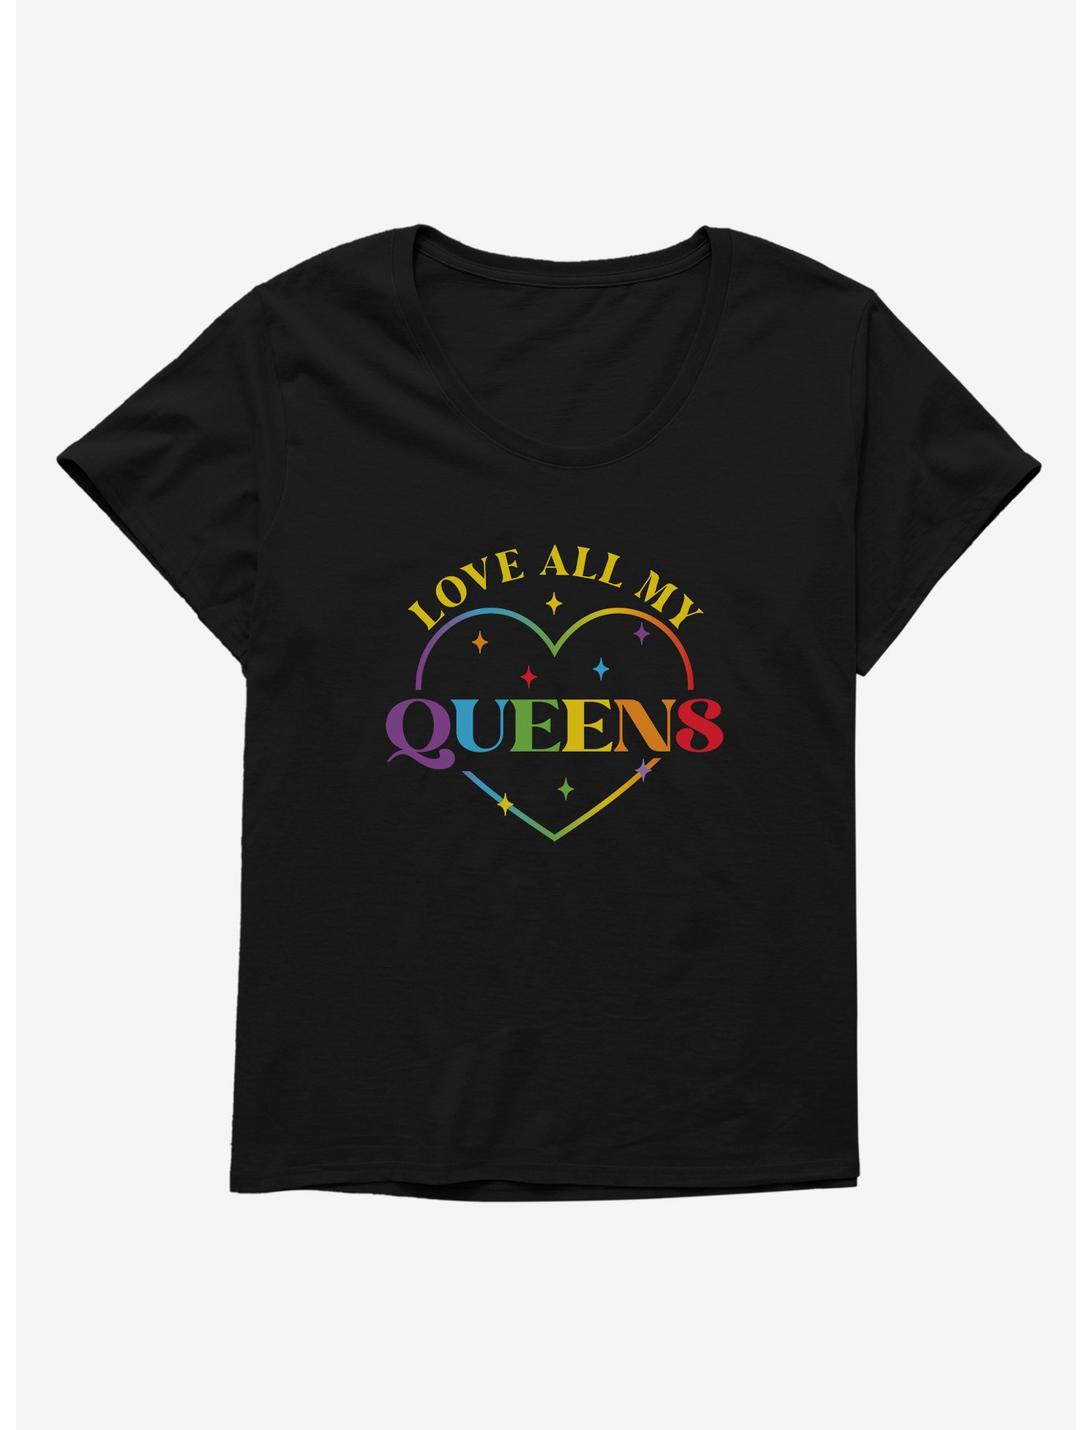 Pride Love All My Queens Heart Womens T-Shirt Plus Size, BLACK, hi-res